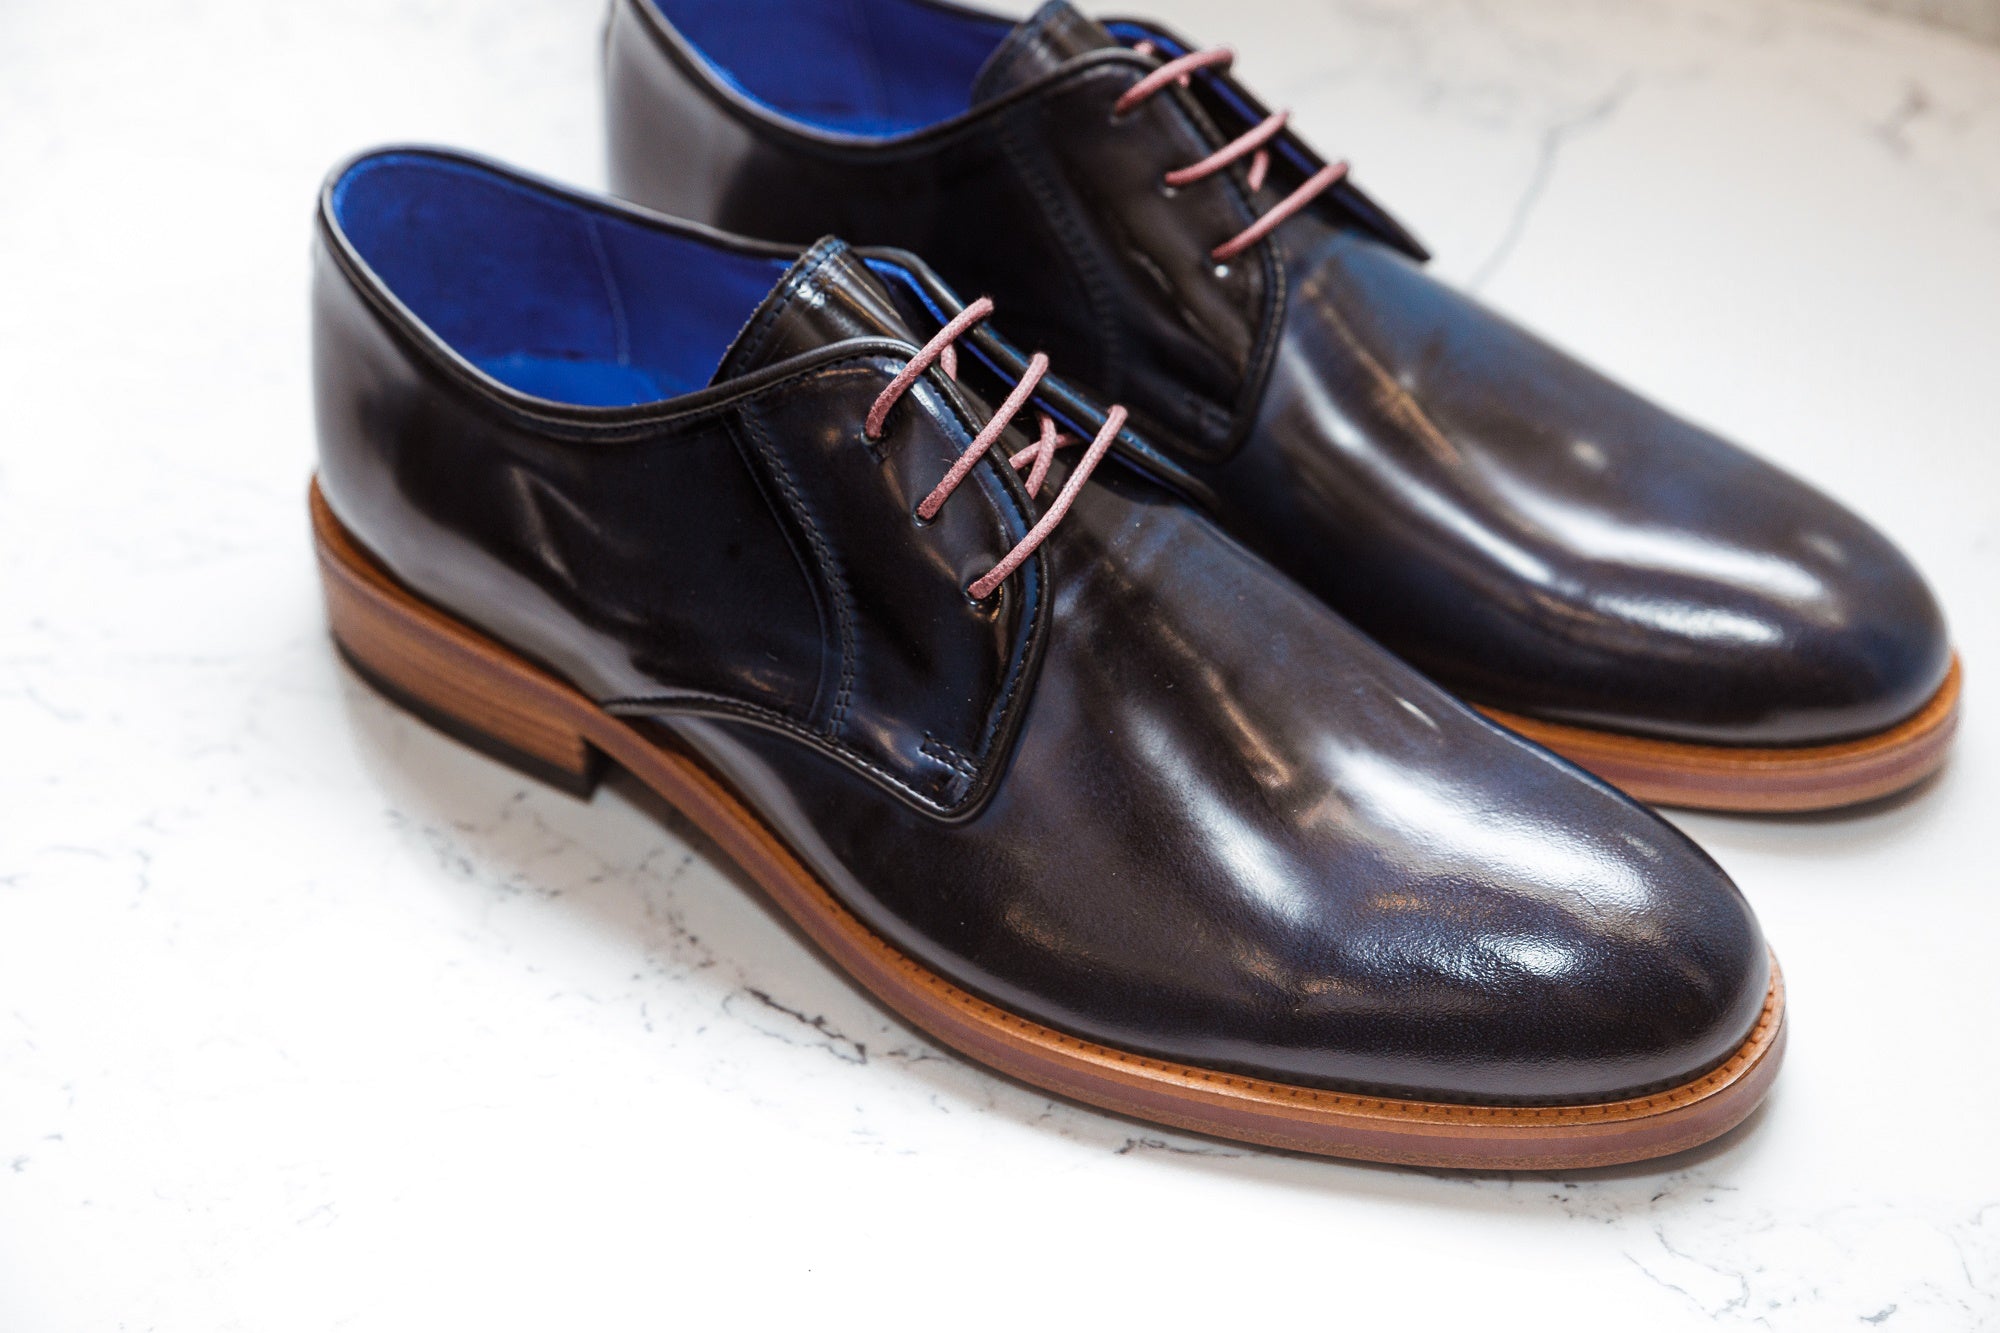 The Wellington Shoes - Navy - Shoes by Urbbana